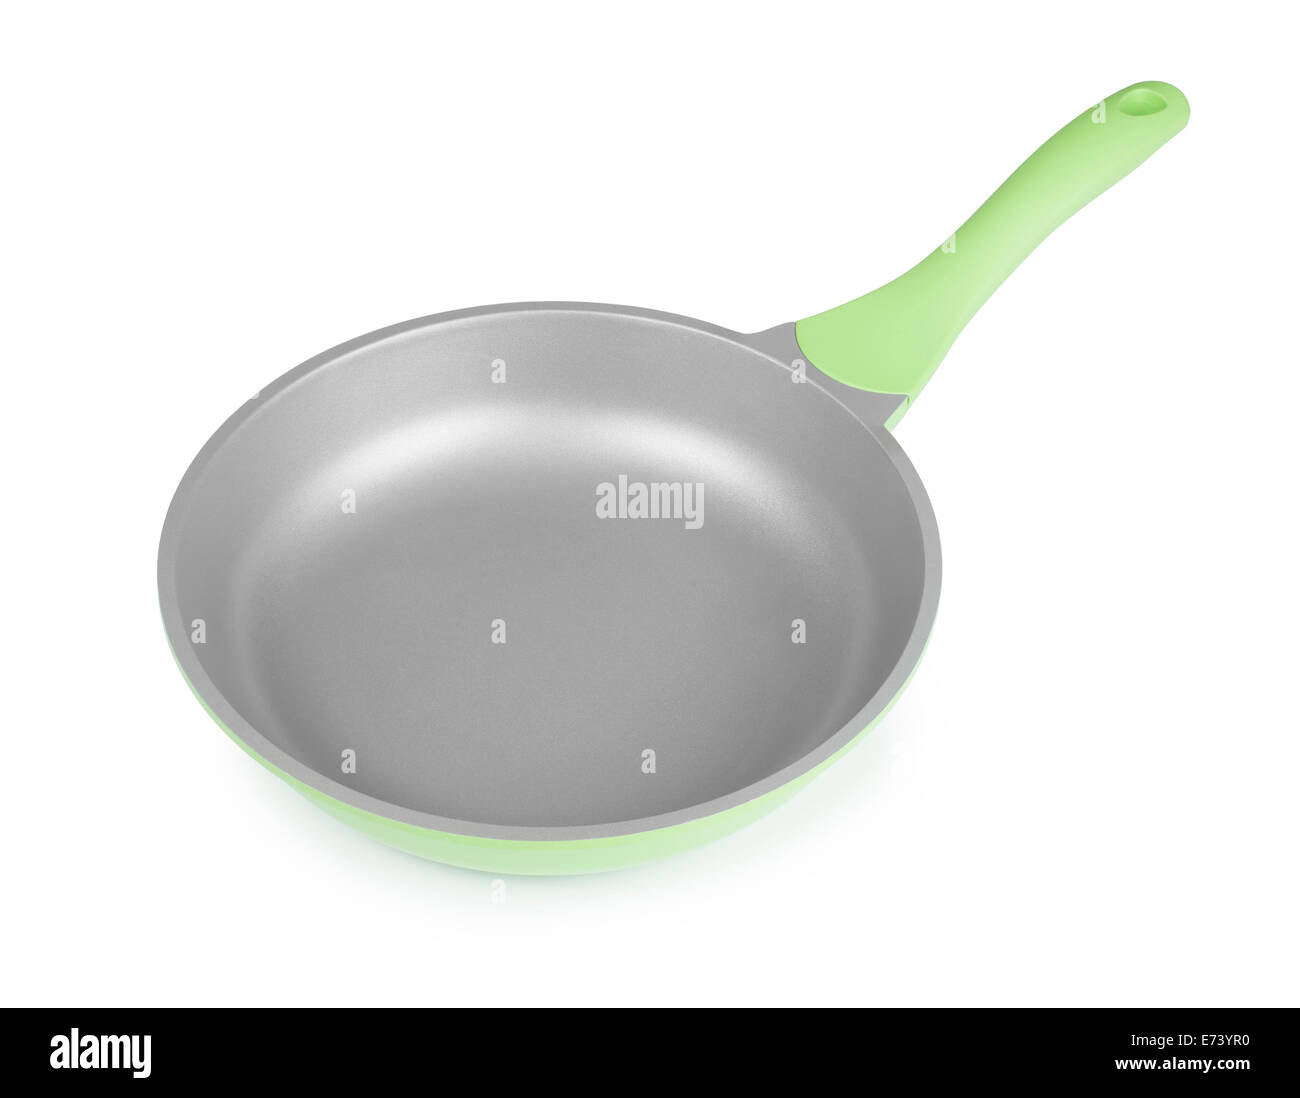 Frying pan or skillet isolated on white with clipping path included Stock Photo